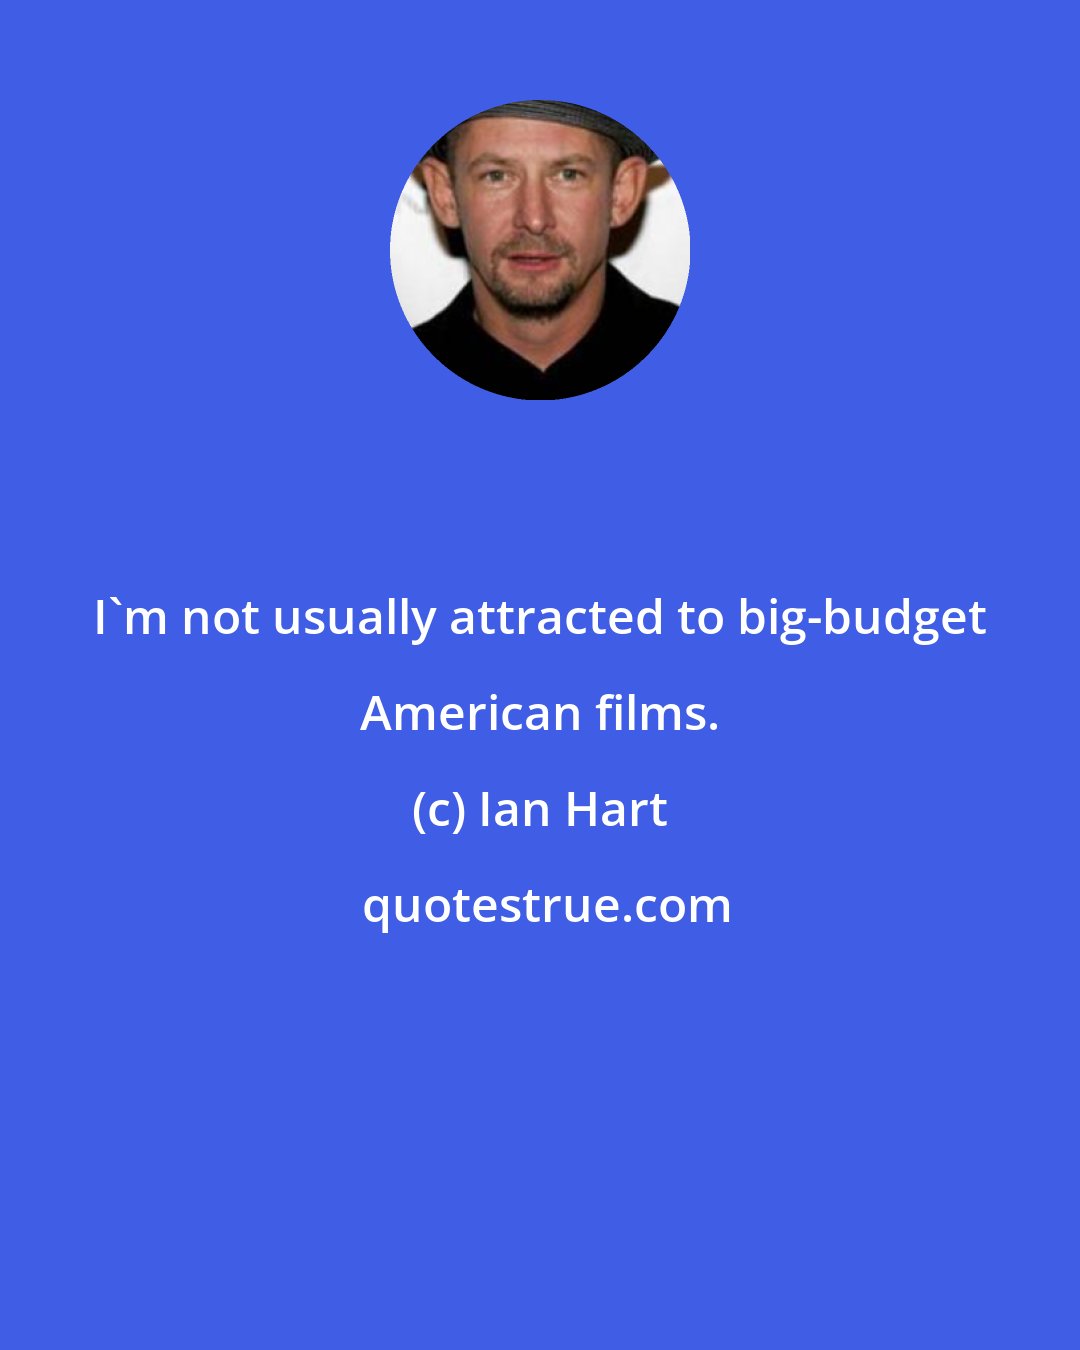 Ian Hart: I'm not usually attracted to big-budget American films.